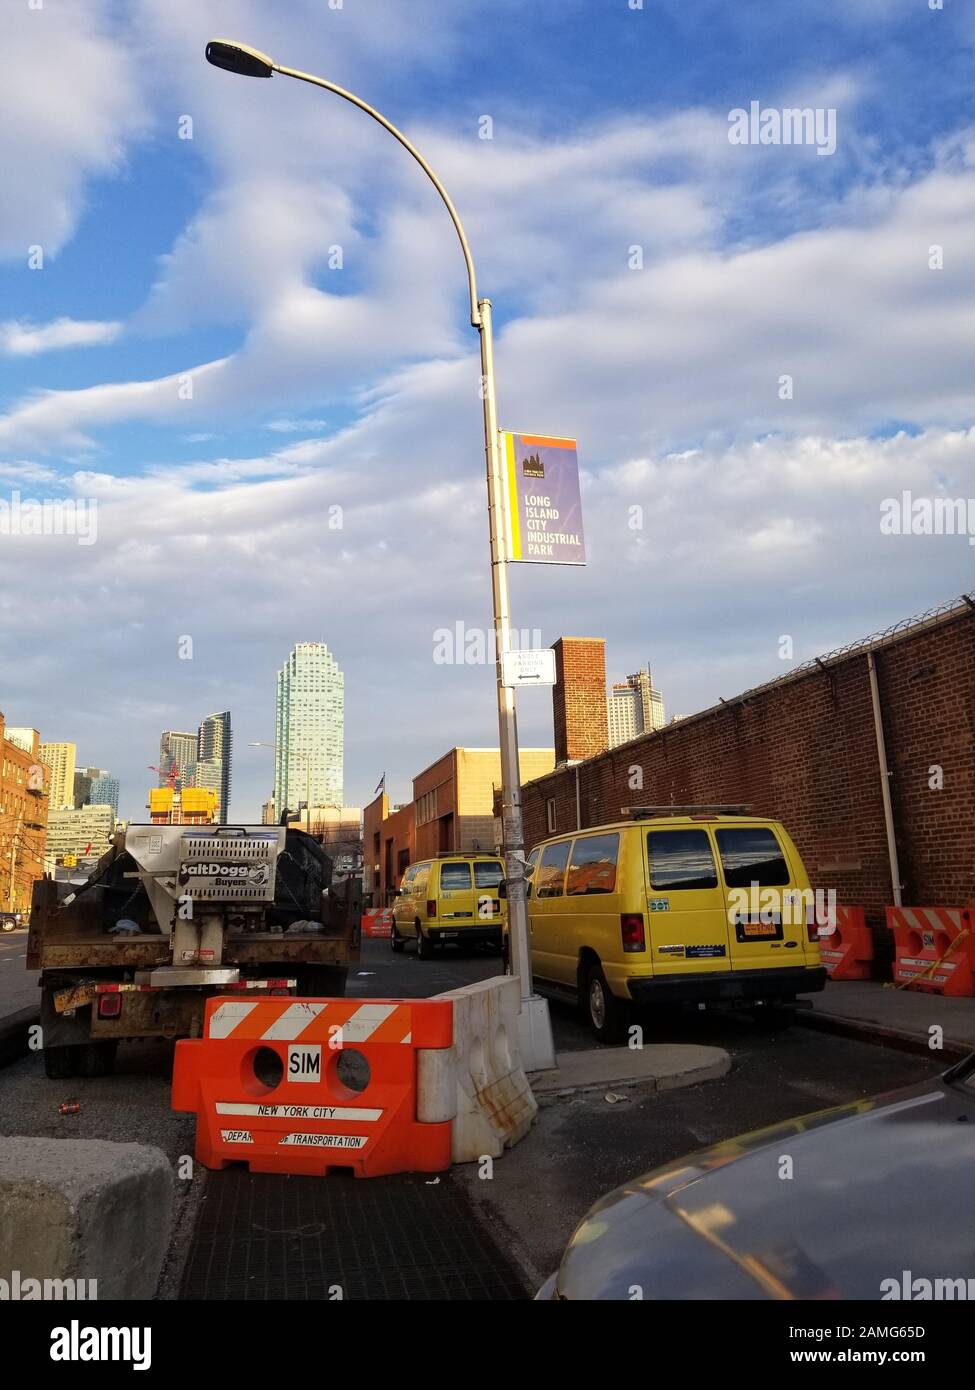 View facing east along 44th Drive from Anable Basin, in Hunters Point, Long Island City, Queens, March 11, 2019. NYC Dept of Transportation vehicles and construction equipment clutter the road.   At center is a 1970s-era Westinghouse lamp post with a 1990s-era sign advertising the 'Long Island City Industrial Park'. Citigroup Building at One Court Square in the background. Ecommerce retailer Amazon has planned to locate a major regional headquarters in this area. () Stock Photo